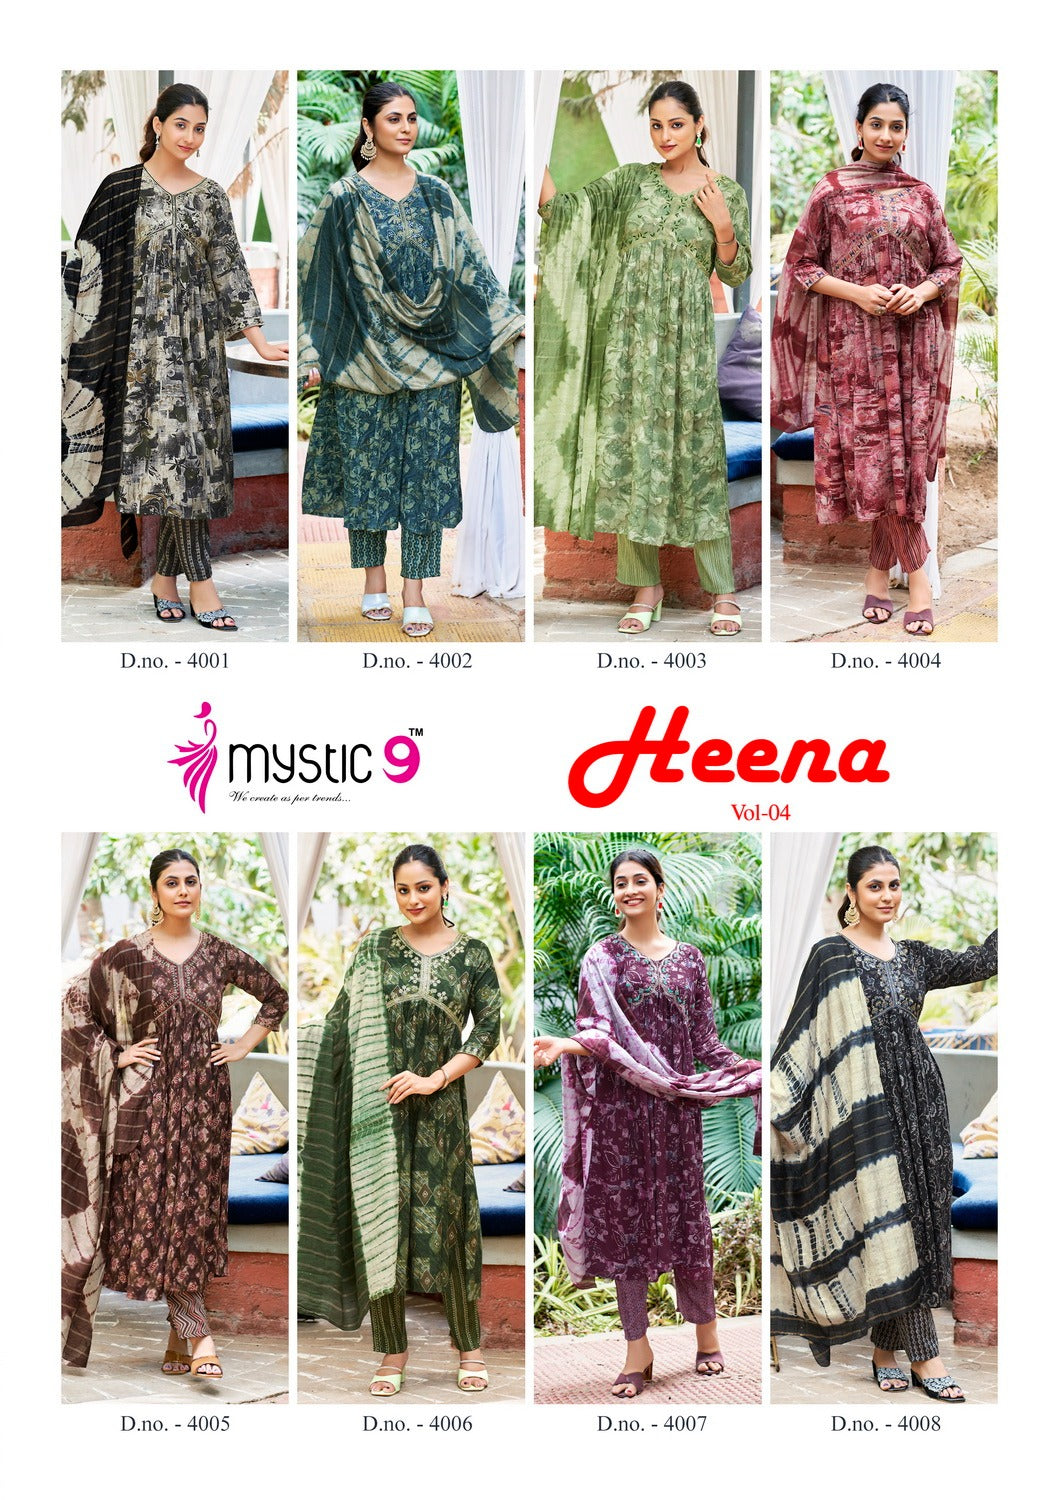 Heena Vol 4 Mystic 9 Rayon Readymade Pant Style Suits Wholesale